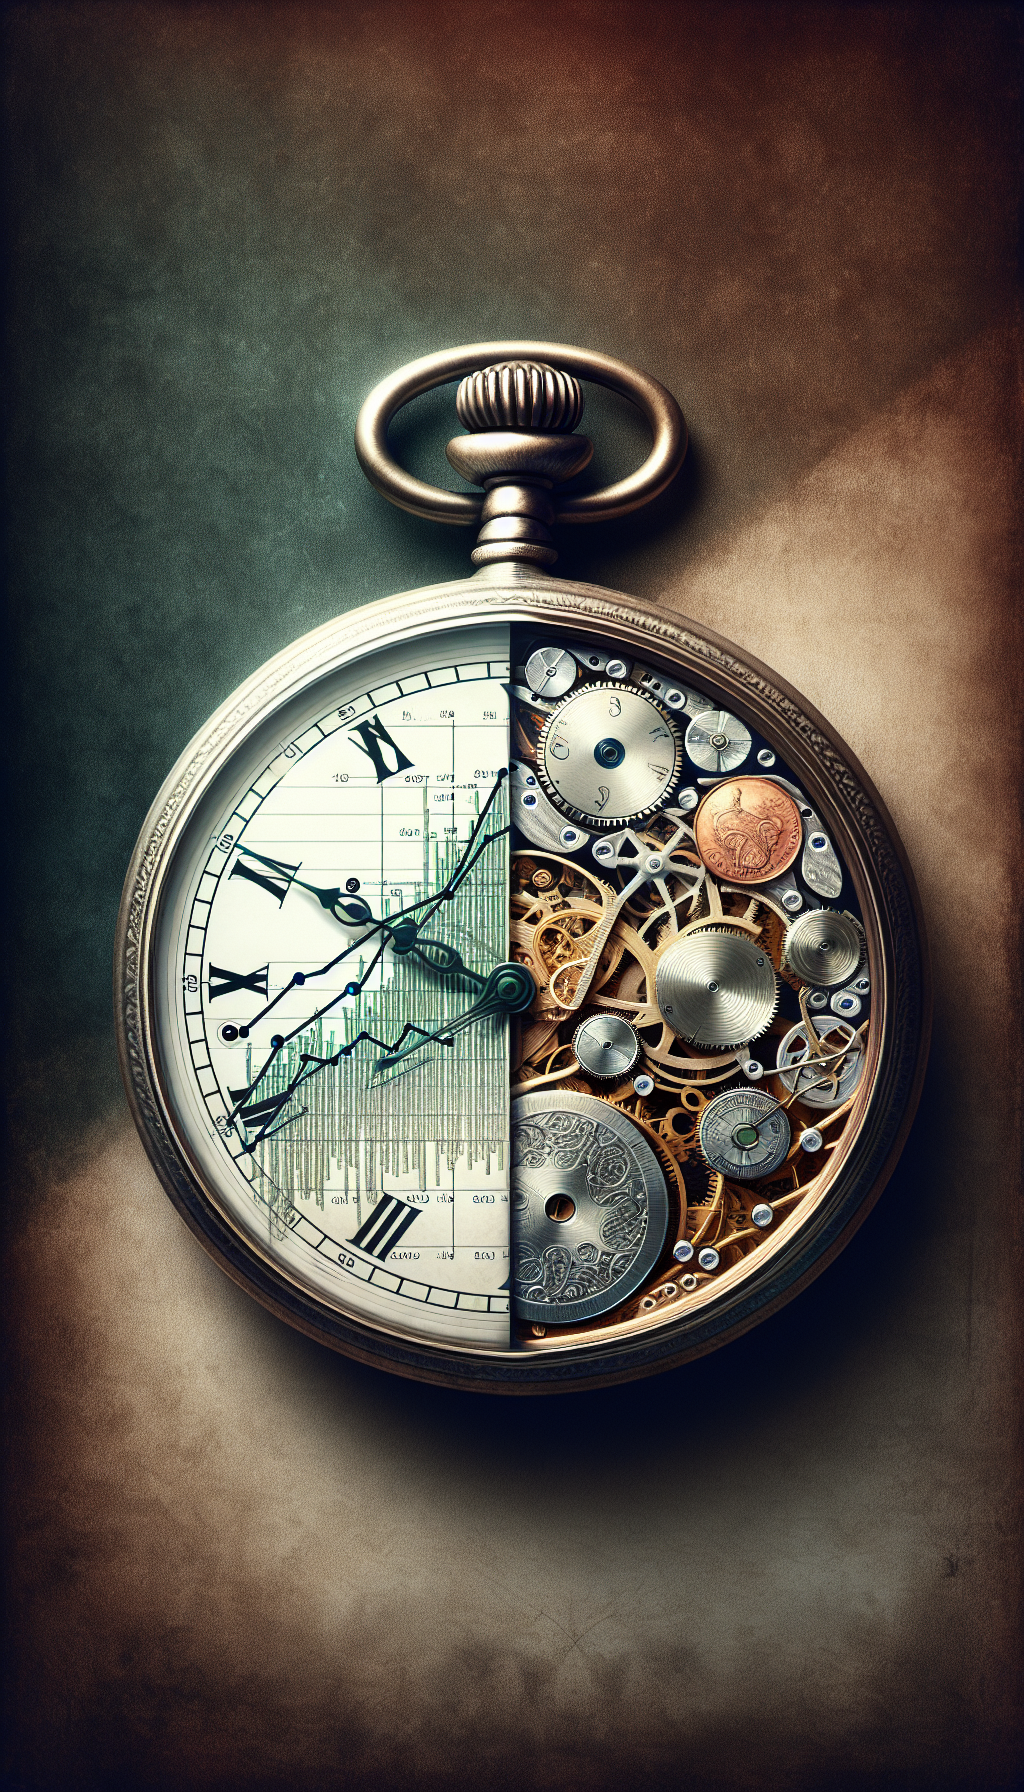 An elegant, vintage pocket watch, split down the middle, with one side pristine and the other with a visible patina, overlaid by a translucent graph showcasing rising value. The watch gears subtly morph into coins, suggesting the influence of time on value. The styles transition from sharp realism on the preserved side to a softer, aged watercolor on the worn half.